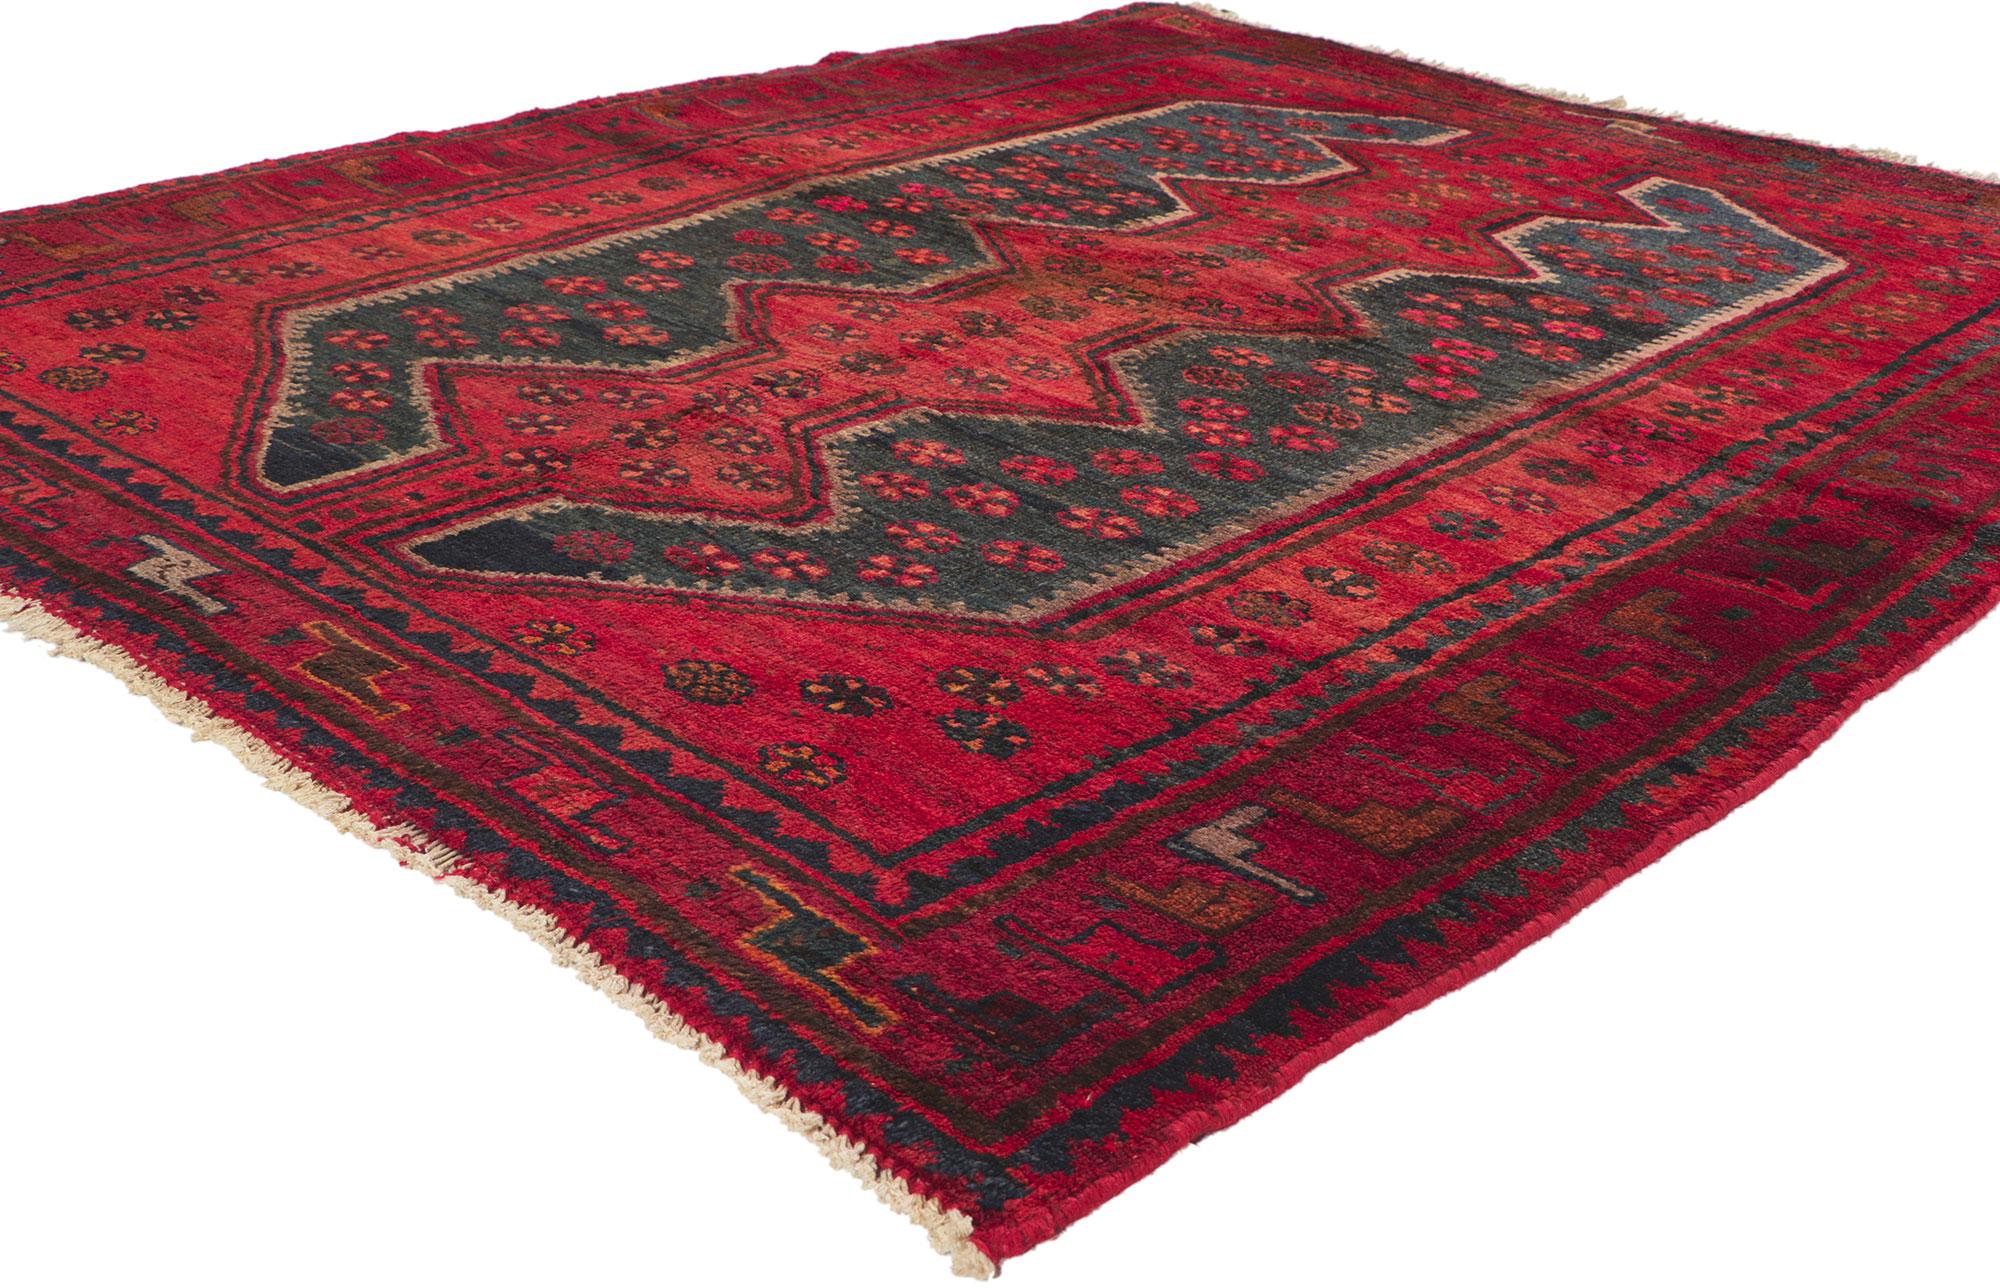 72109 Vintage Persian Hamadan Rug, 05'00 x 06'07. 
Emanating modern style with incredible detail and texture, this hand knotted wool vintage Persian Hamadan rug is a captivating vision of woven beauty. The tribal design and saturated color palette